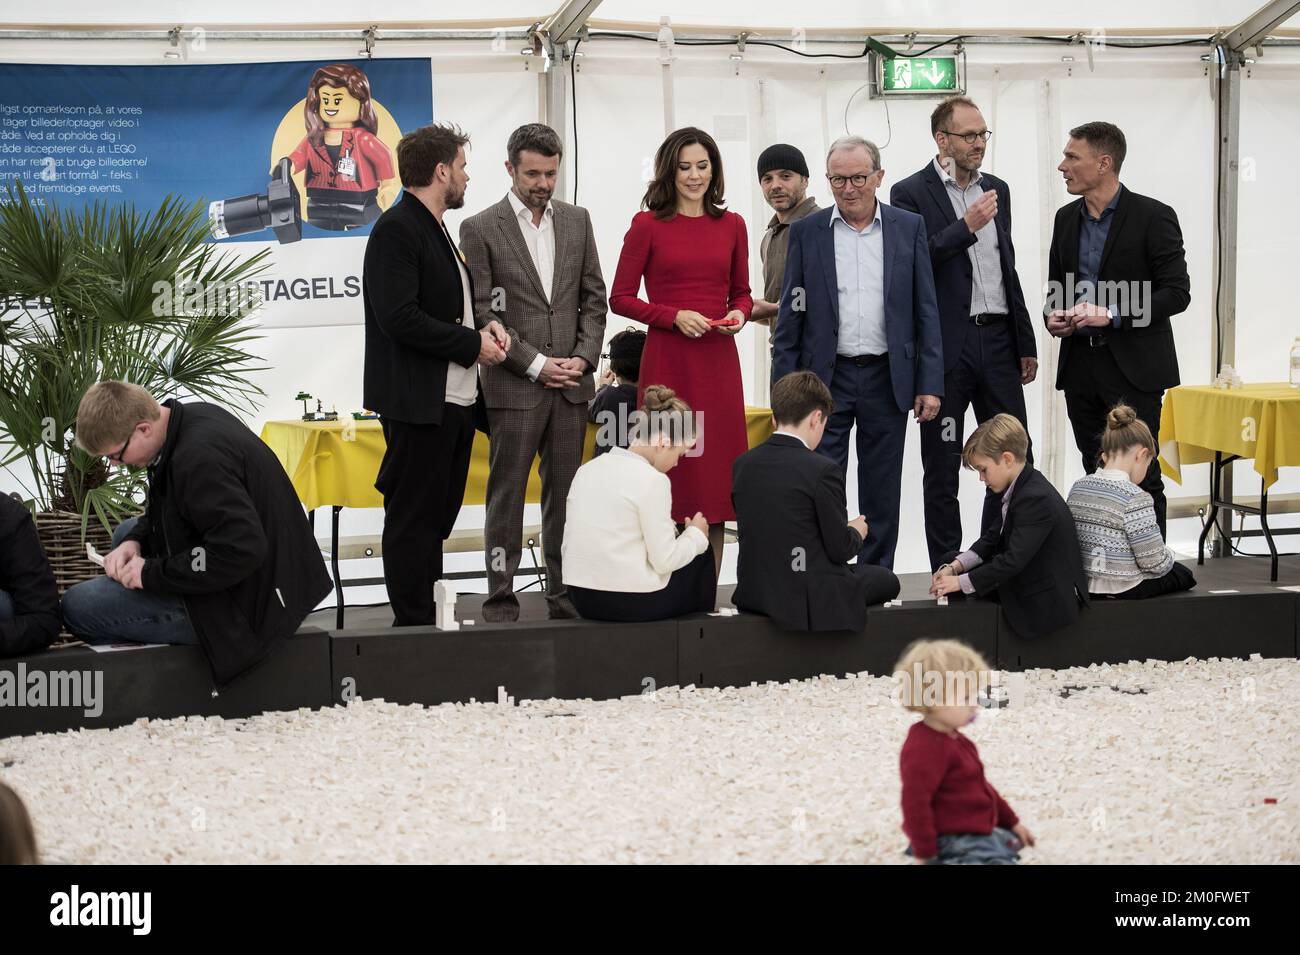 Bjarke Ingels, kronprins Frederik, kronprinsesse Mary, Kjeld Kirk Kristiansen og JÃ¸rgen Vig Knudstorp.The Danish Crown Prince Frederik and Crown Prince Mary and their four children attended the opening of the new â€˜LEGO Houseâ€™ in Billund, Denmark, September 28, 2017. The building inspired by the famous Danish LEGO-bricks was designed by Danish architect Bjarke Ingels and offers indoor activities such as LEGO play zones, restaurants and conference facilities. /ritzau/ Morten Lau-Nielsen. Stock Photo